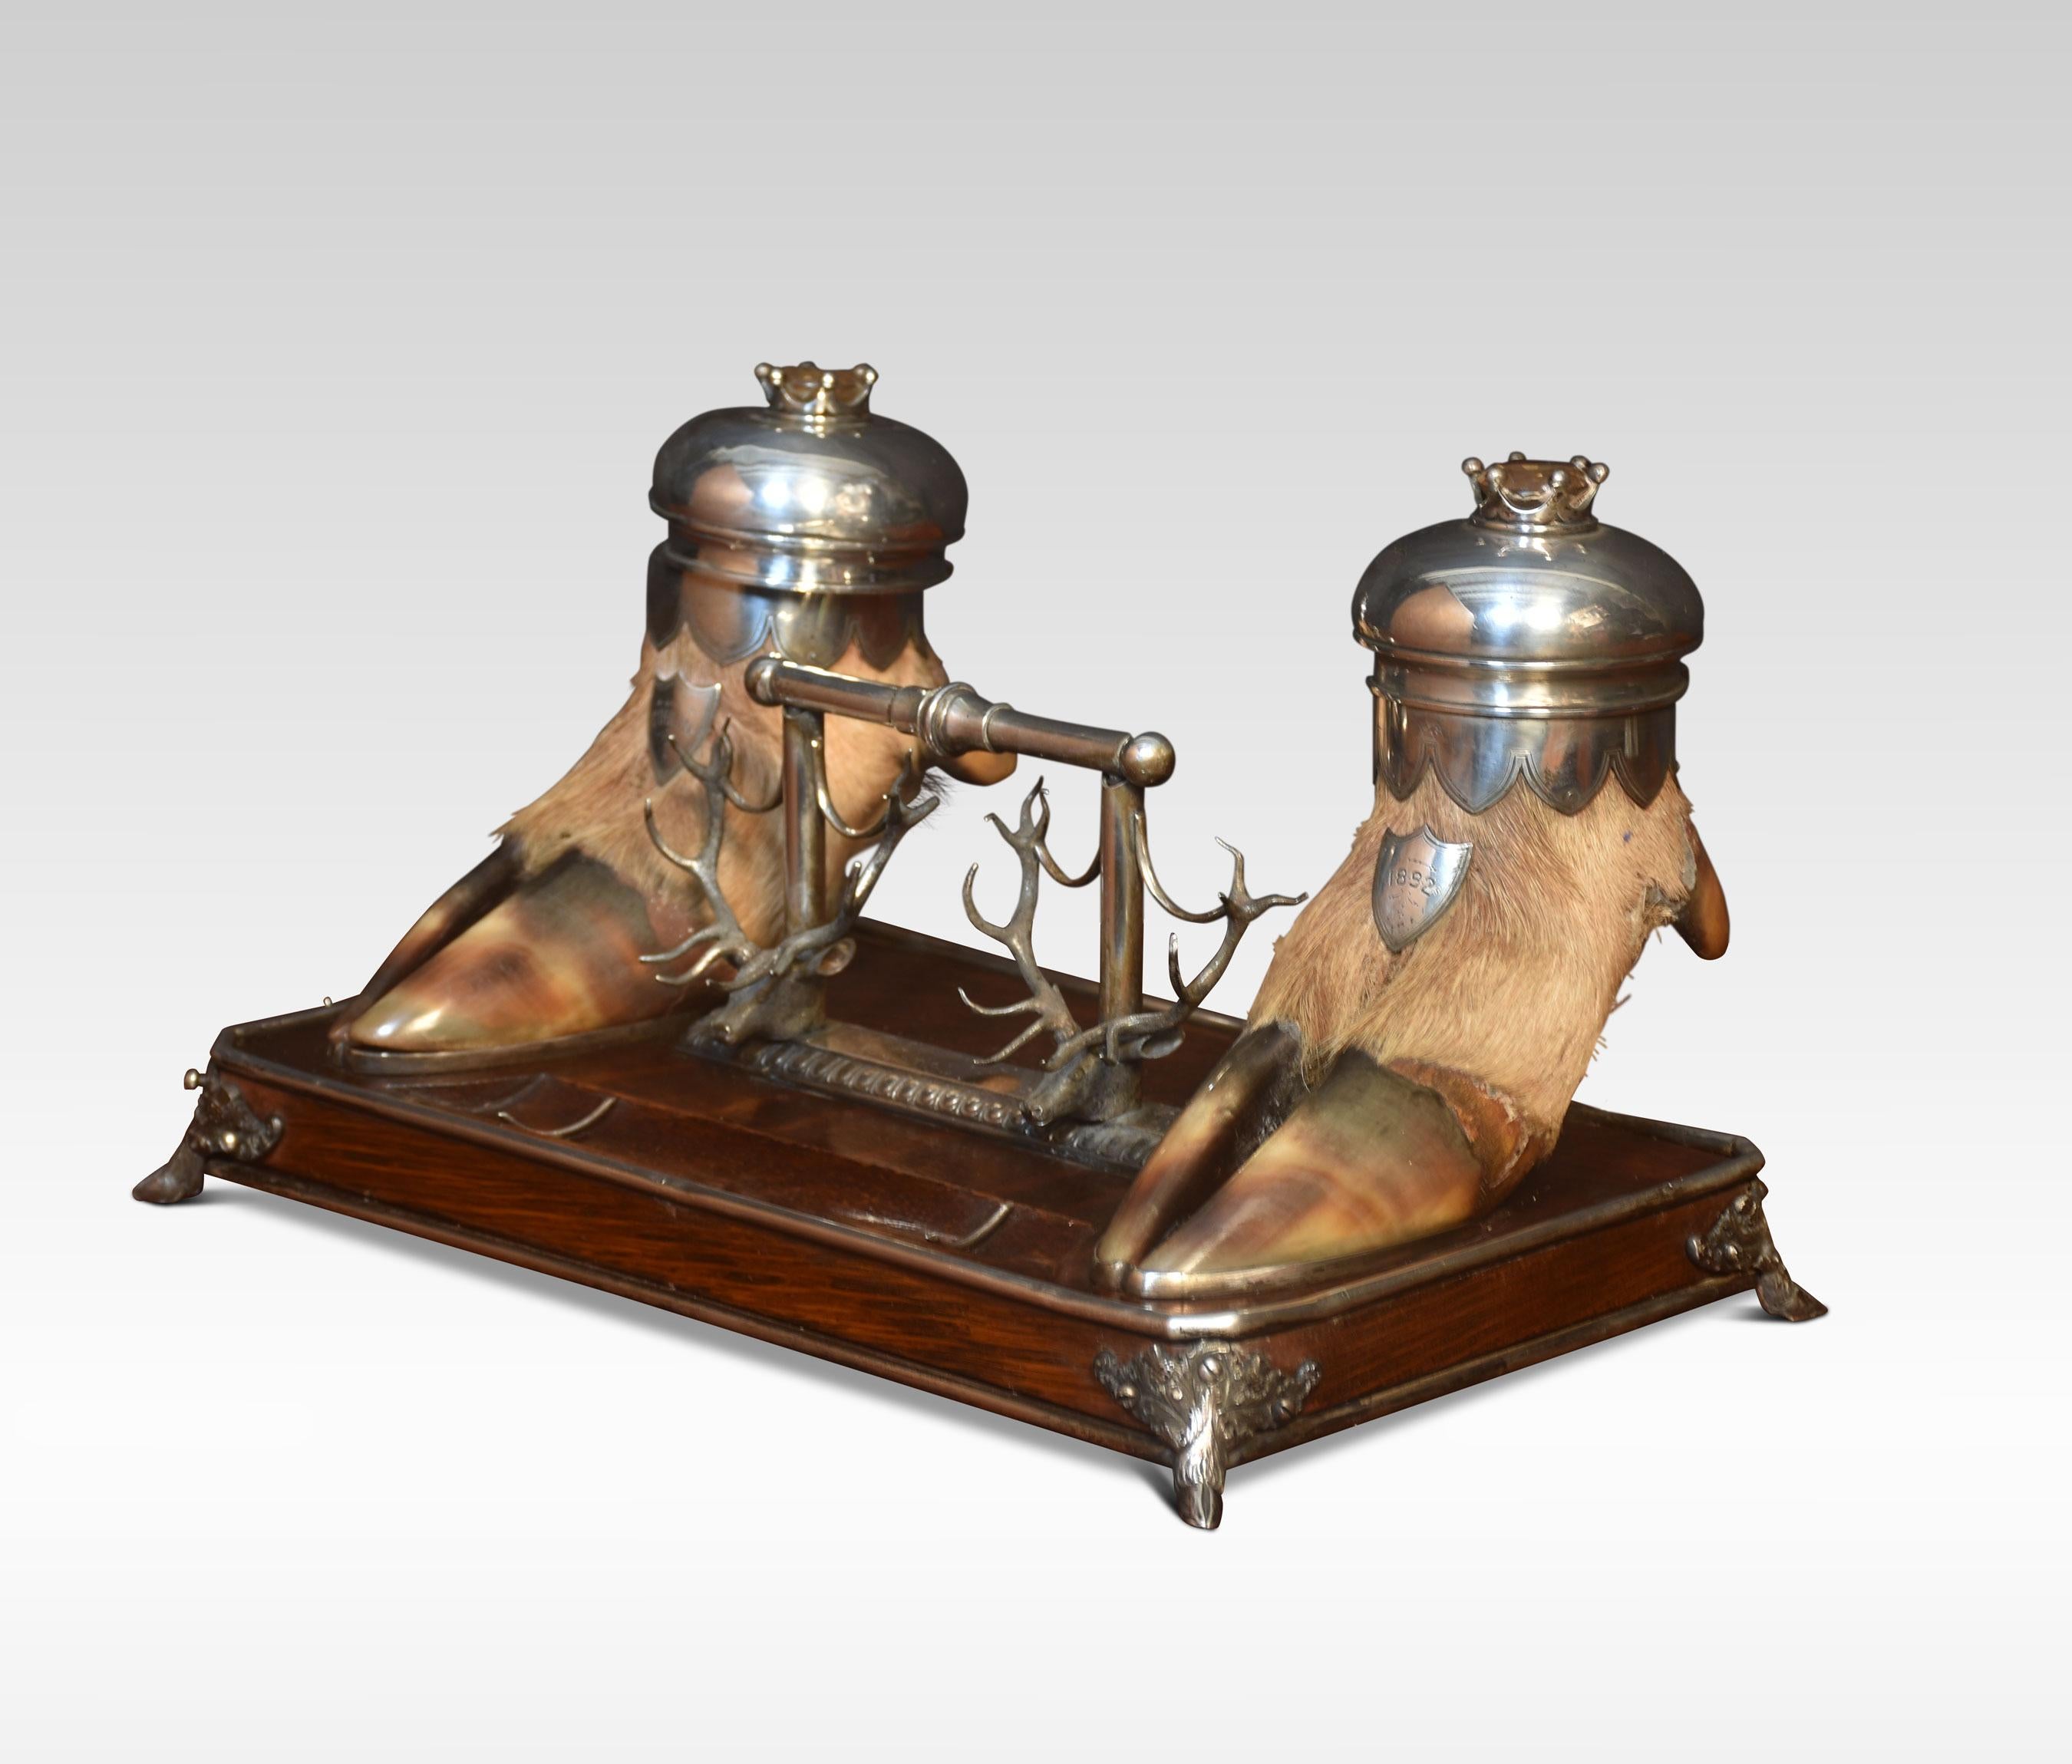 19th century Scottish double inkwell by Arthur Medlock with two hoof inkwells with metal covers centred by a facet citrine, on a wooden base, the inkwells stamped Medlock Inverness.
Dimensions
Height 7 inches
Width 12.5 inches
Depth 7.5 inches.